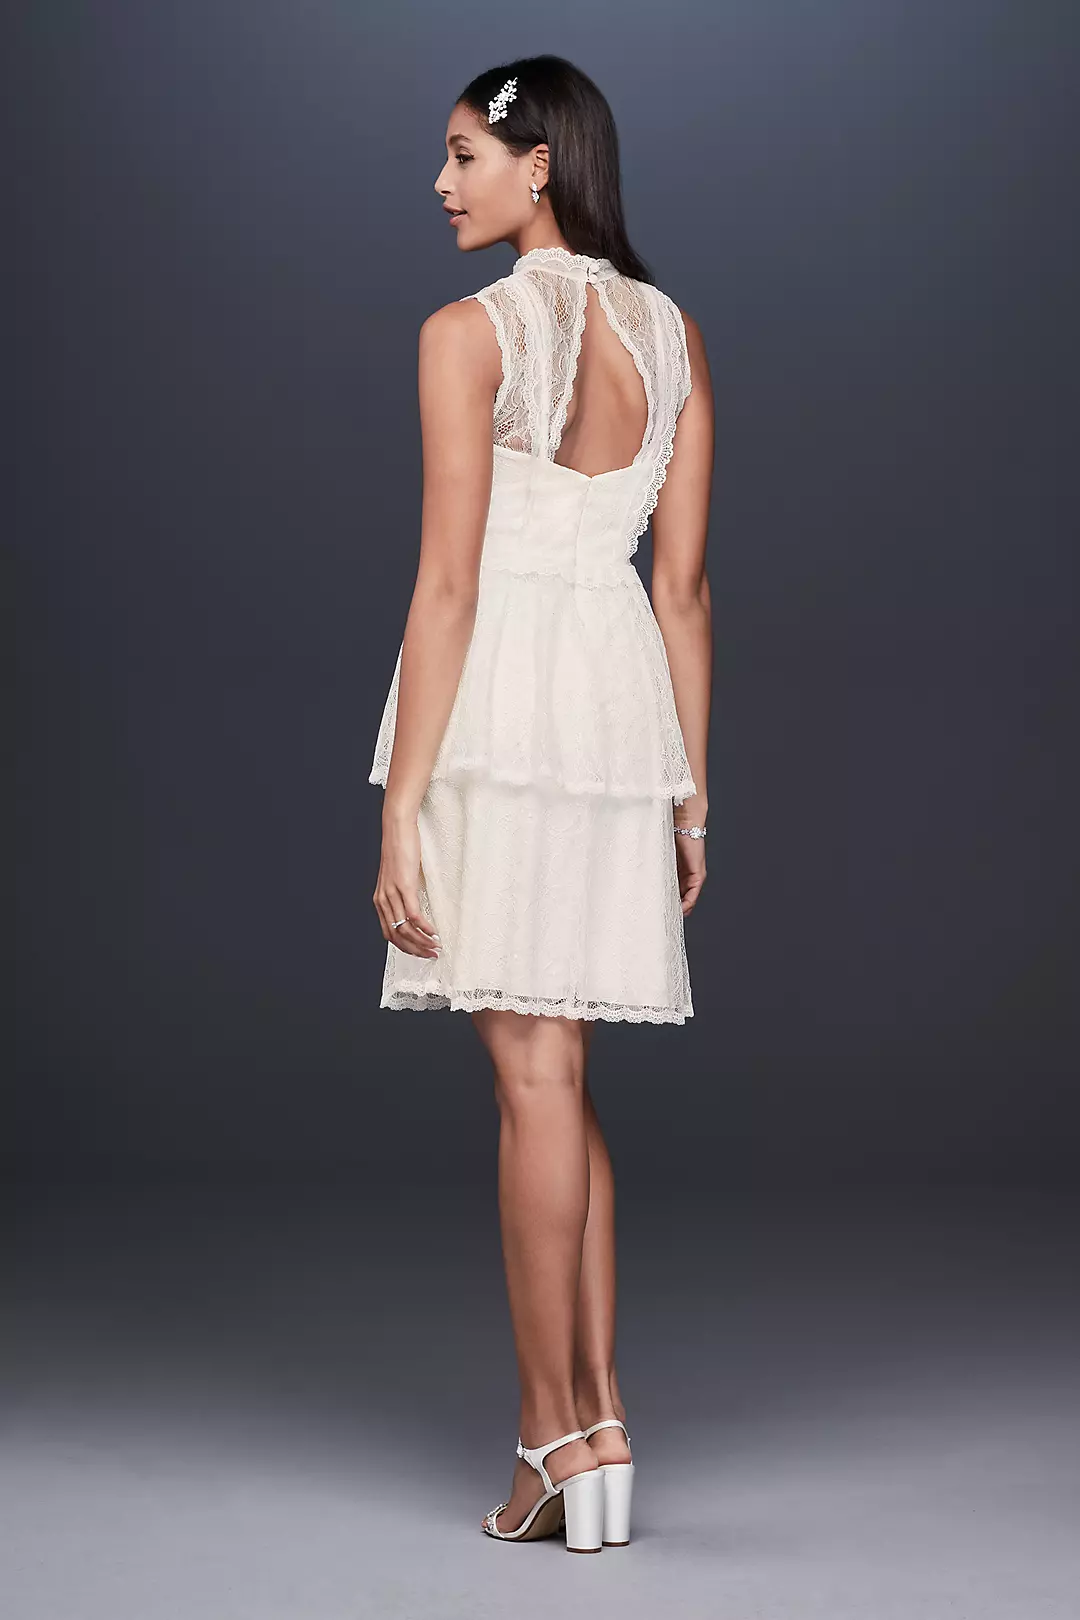 Tiered Lace Short Dress with Illusion High Neck Image 2